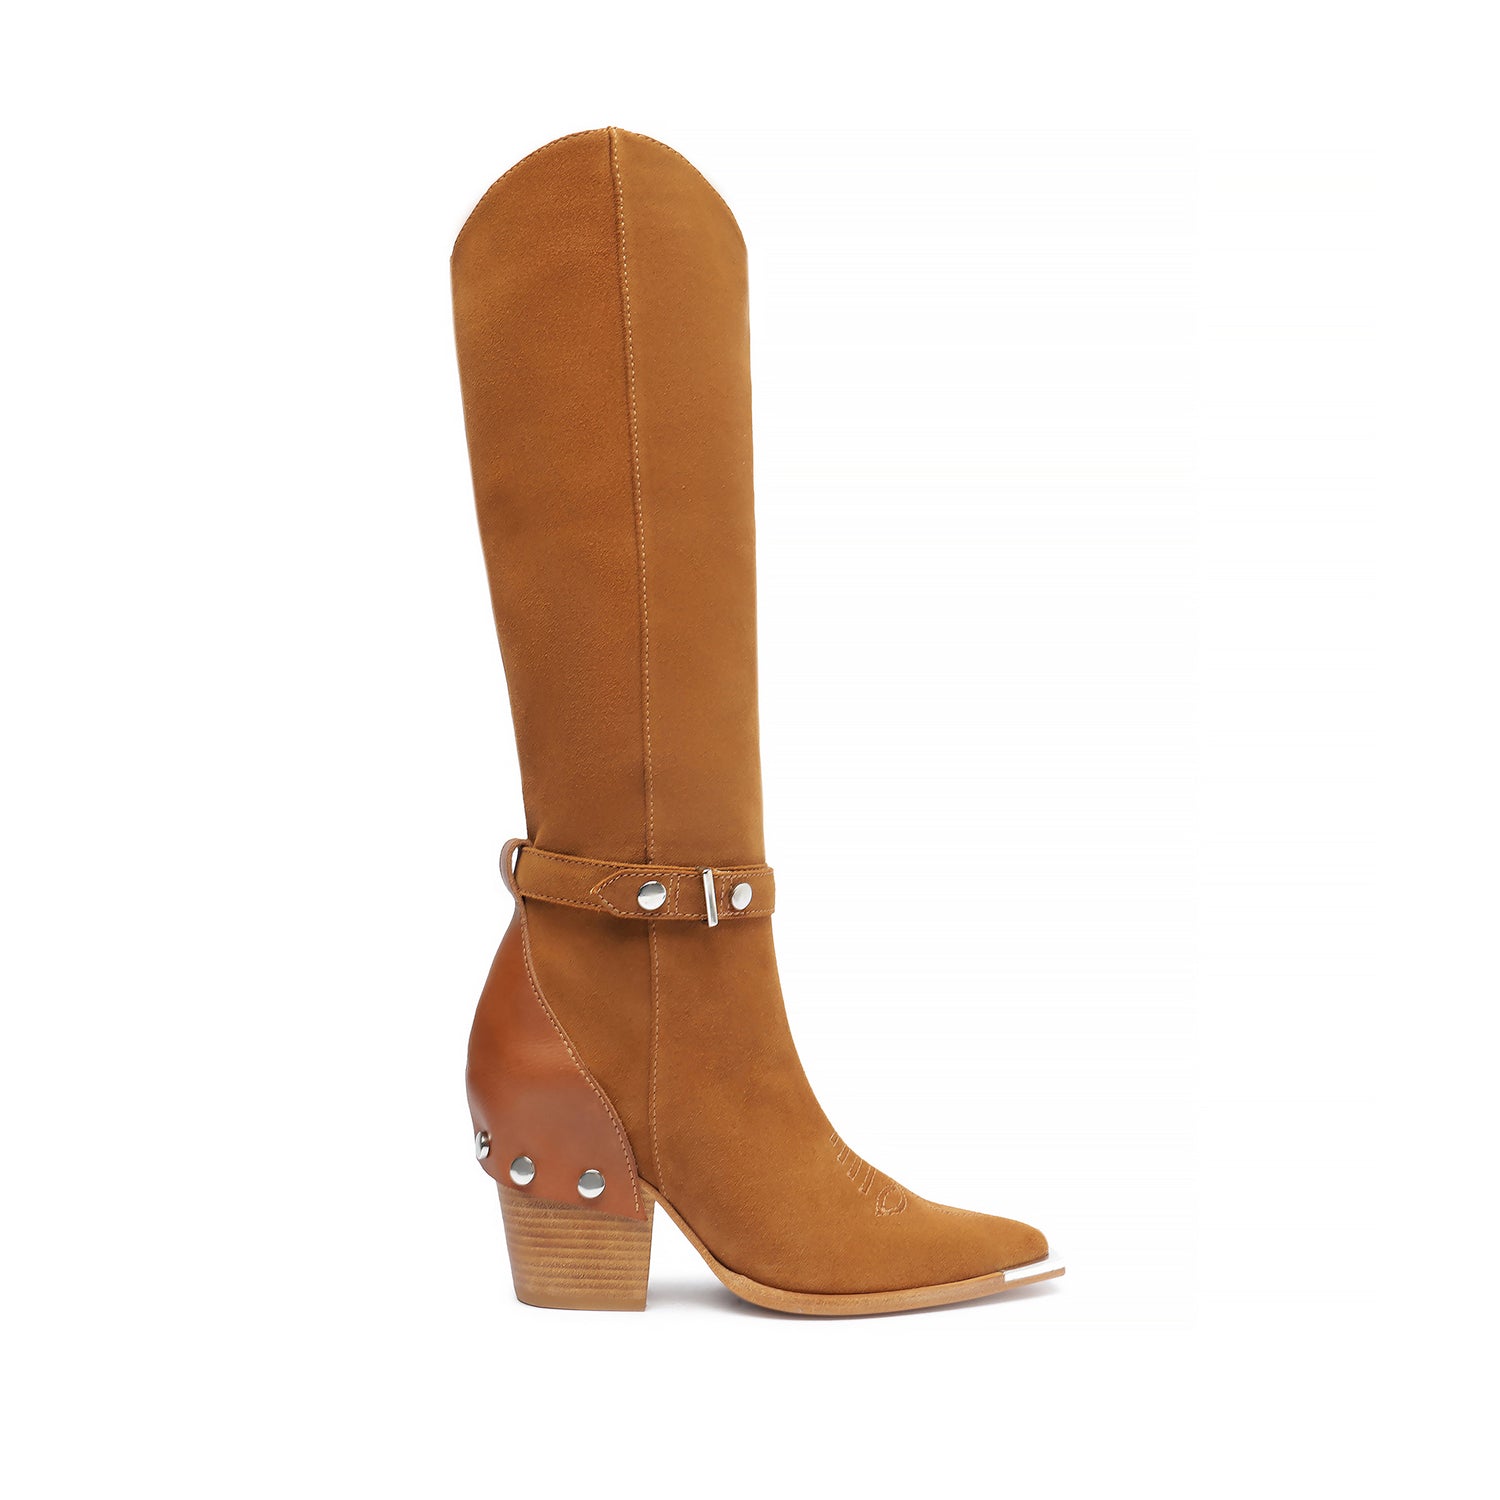 Rianne Suede Boot Boots Open Stock 5 Brown Suede - Schutz Shoes